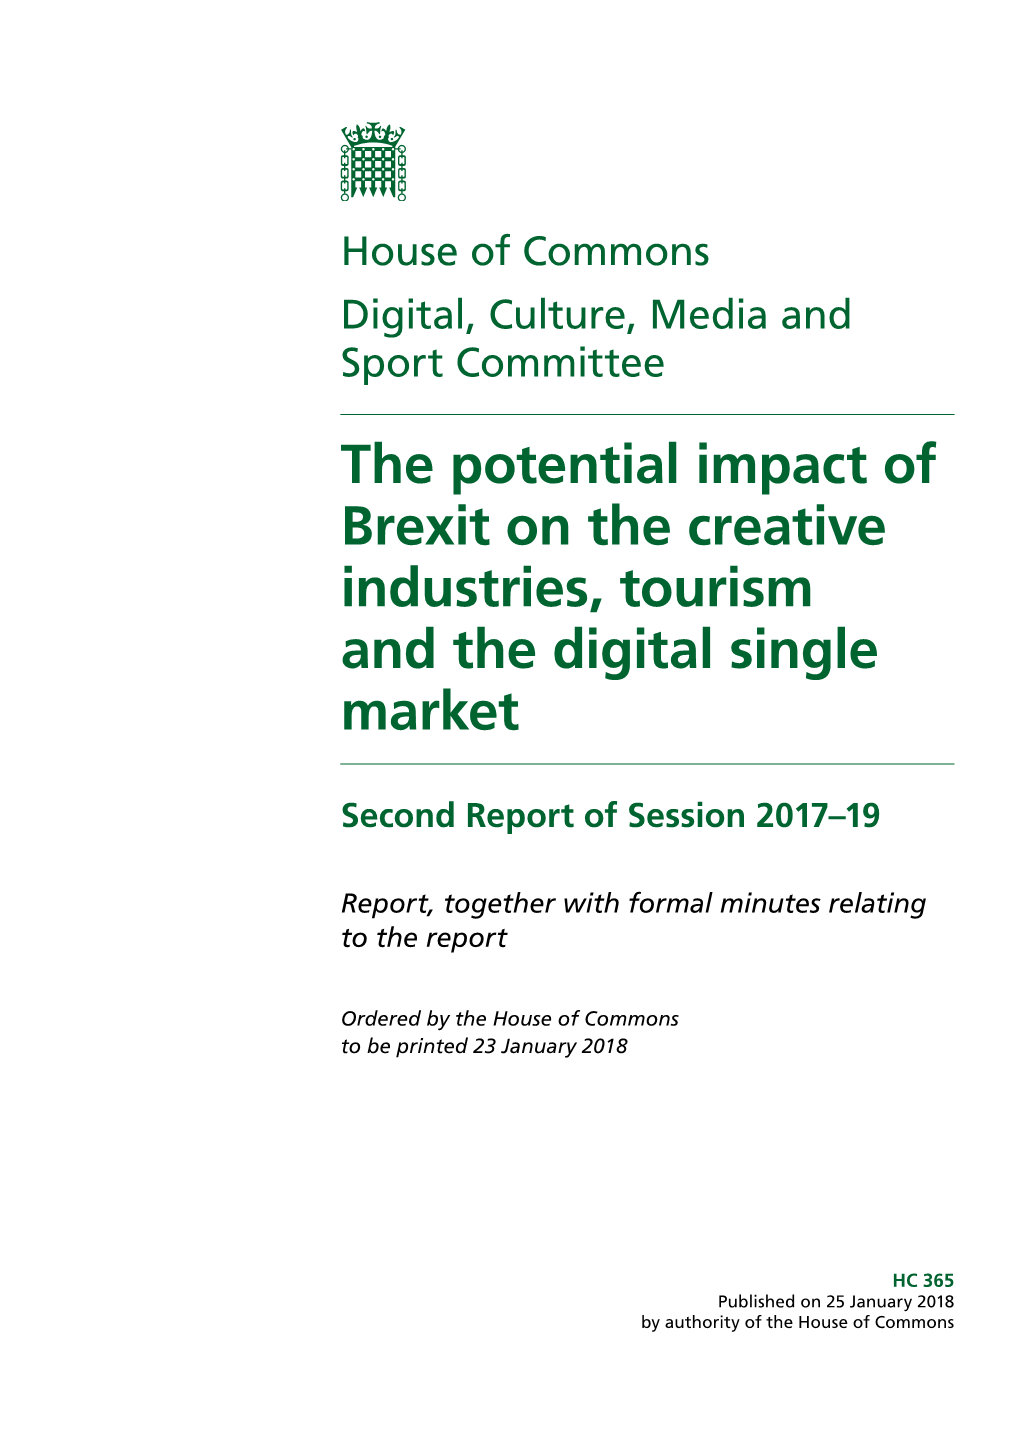 Impact of Brexit on UK Creative Industries, Tourism and the Single Digital Market